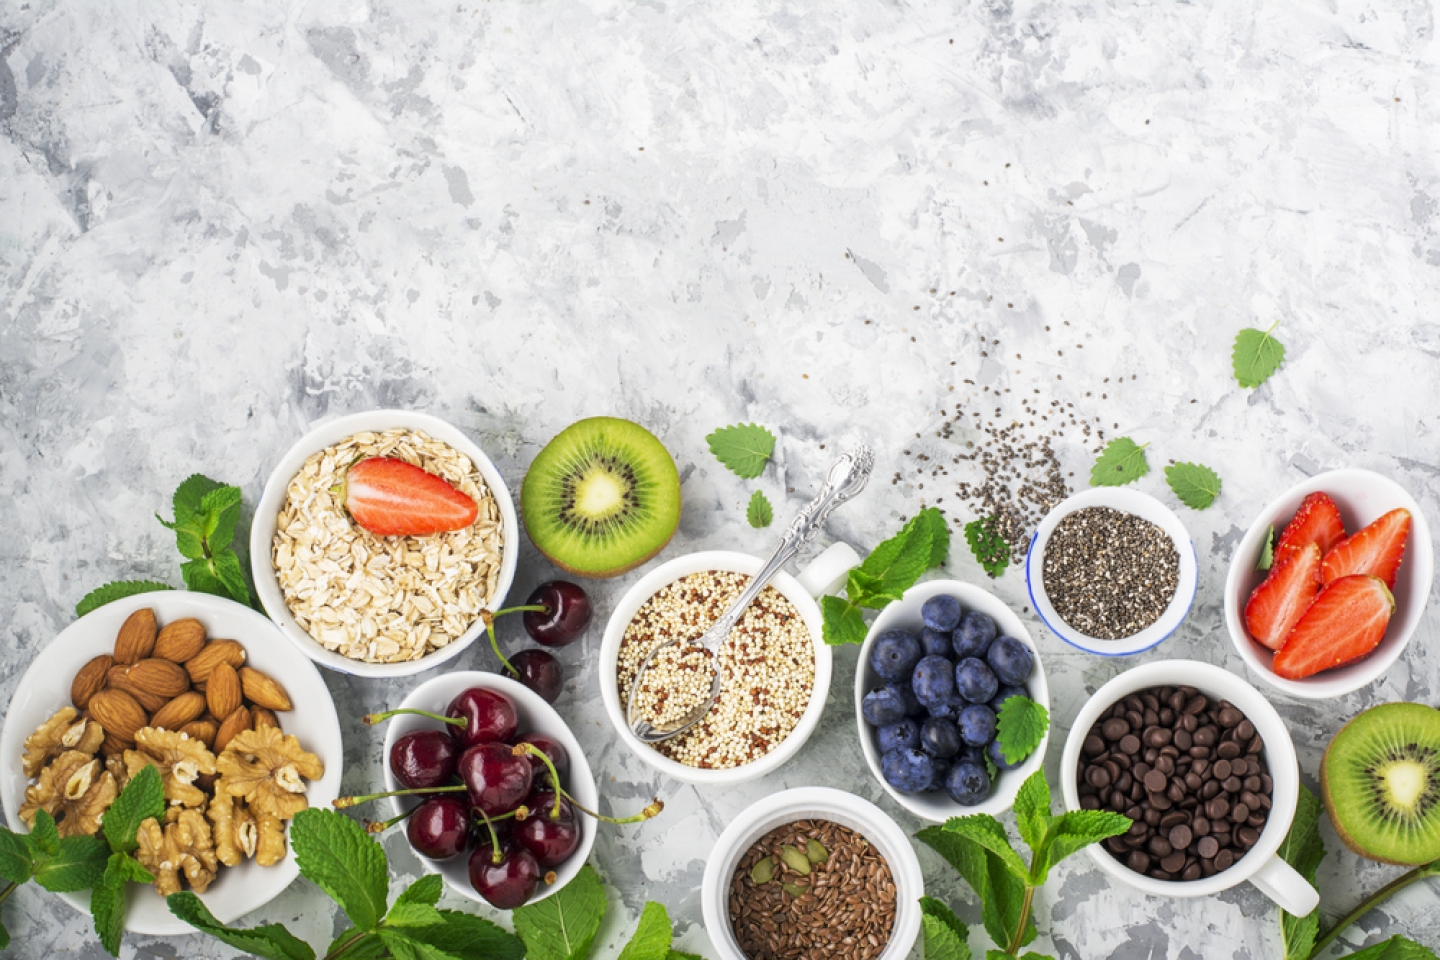 Healthy fitness food from fresh fruits, berries, greens, super food: kinoa, chia seeds, flax seed, strawberry, blueberry, kiwi, cherry, almonds, walnuts, mint, oatmeall flakes on a light background.